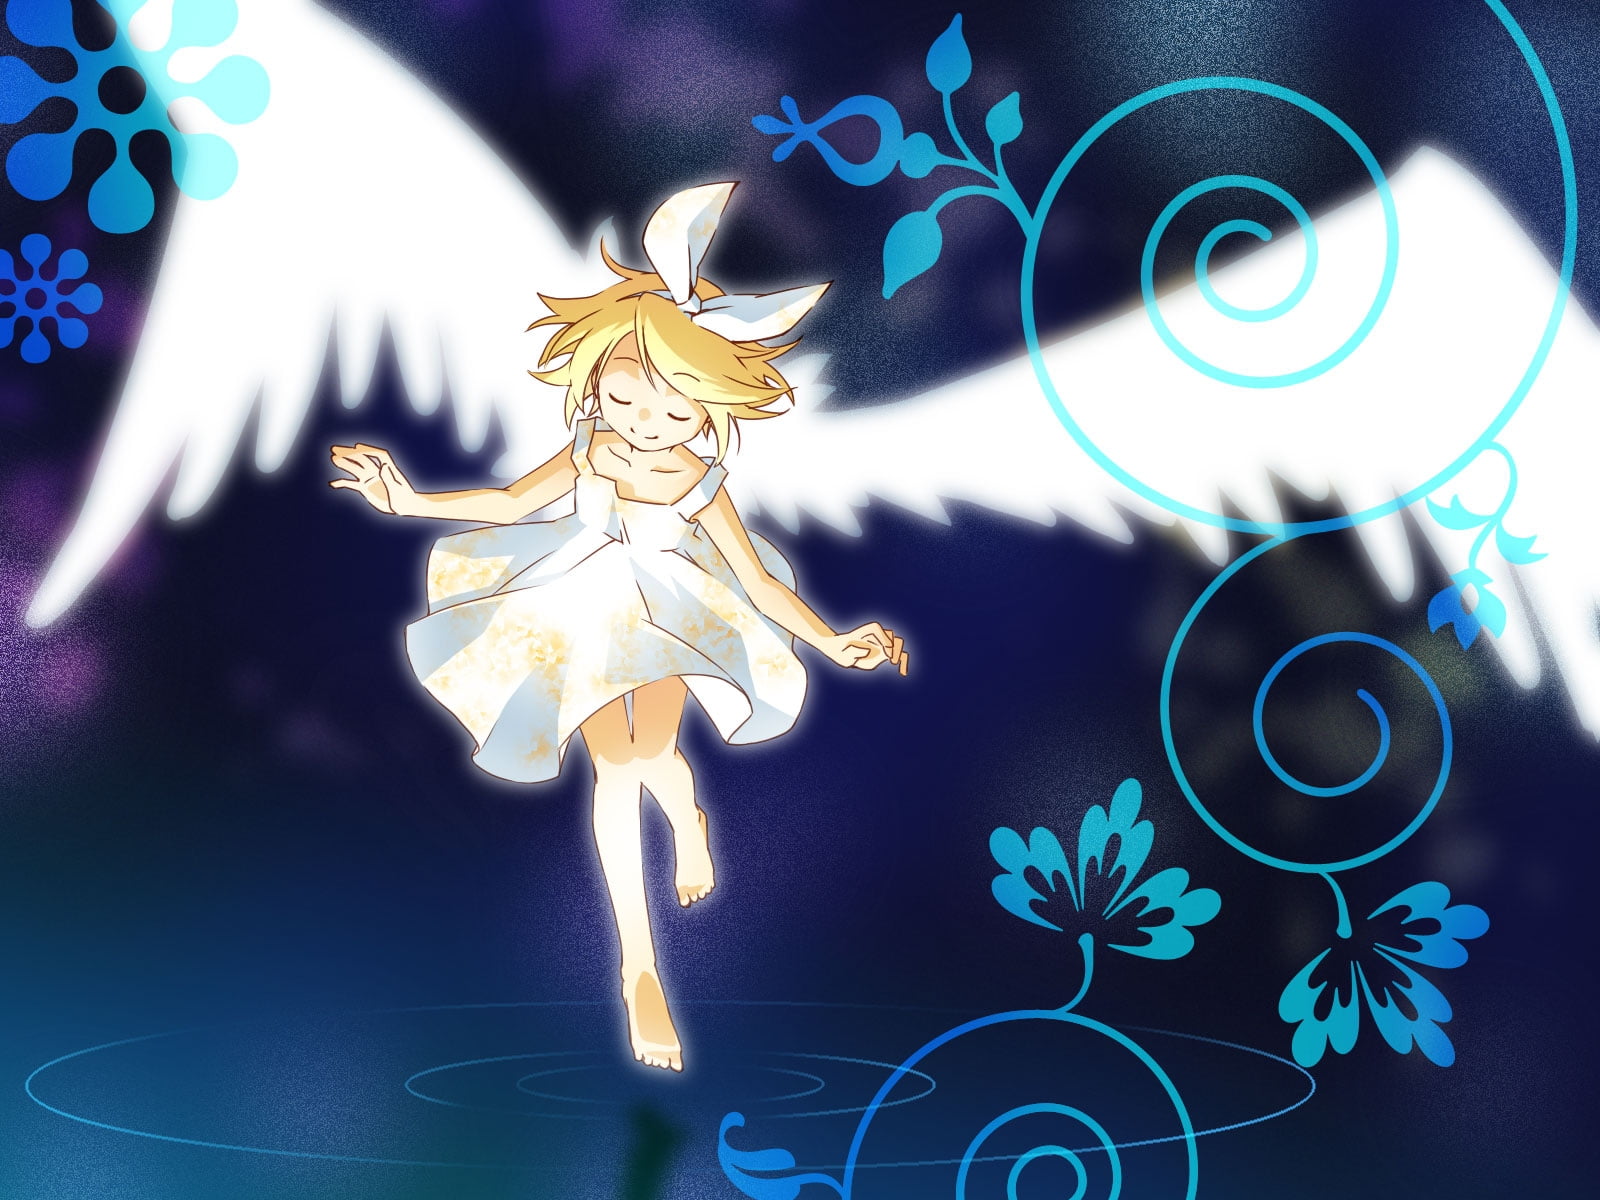 Fly With Me [Anime Boy] by Skyfights on DeviantArt